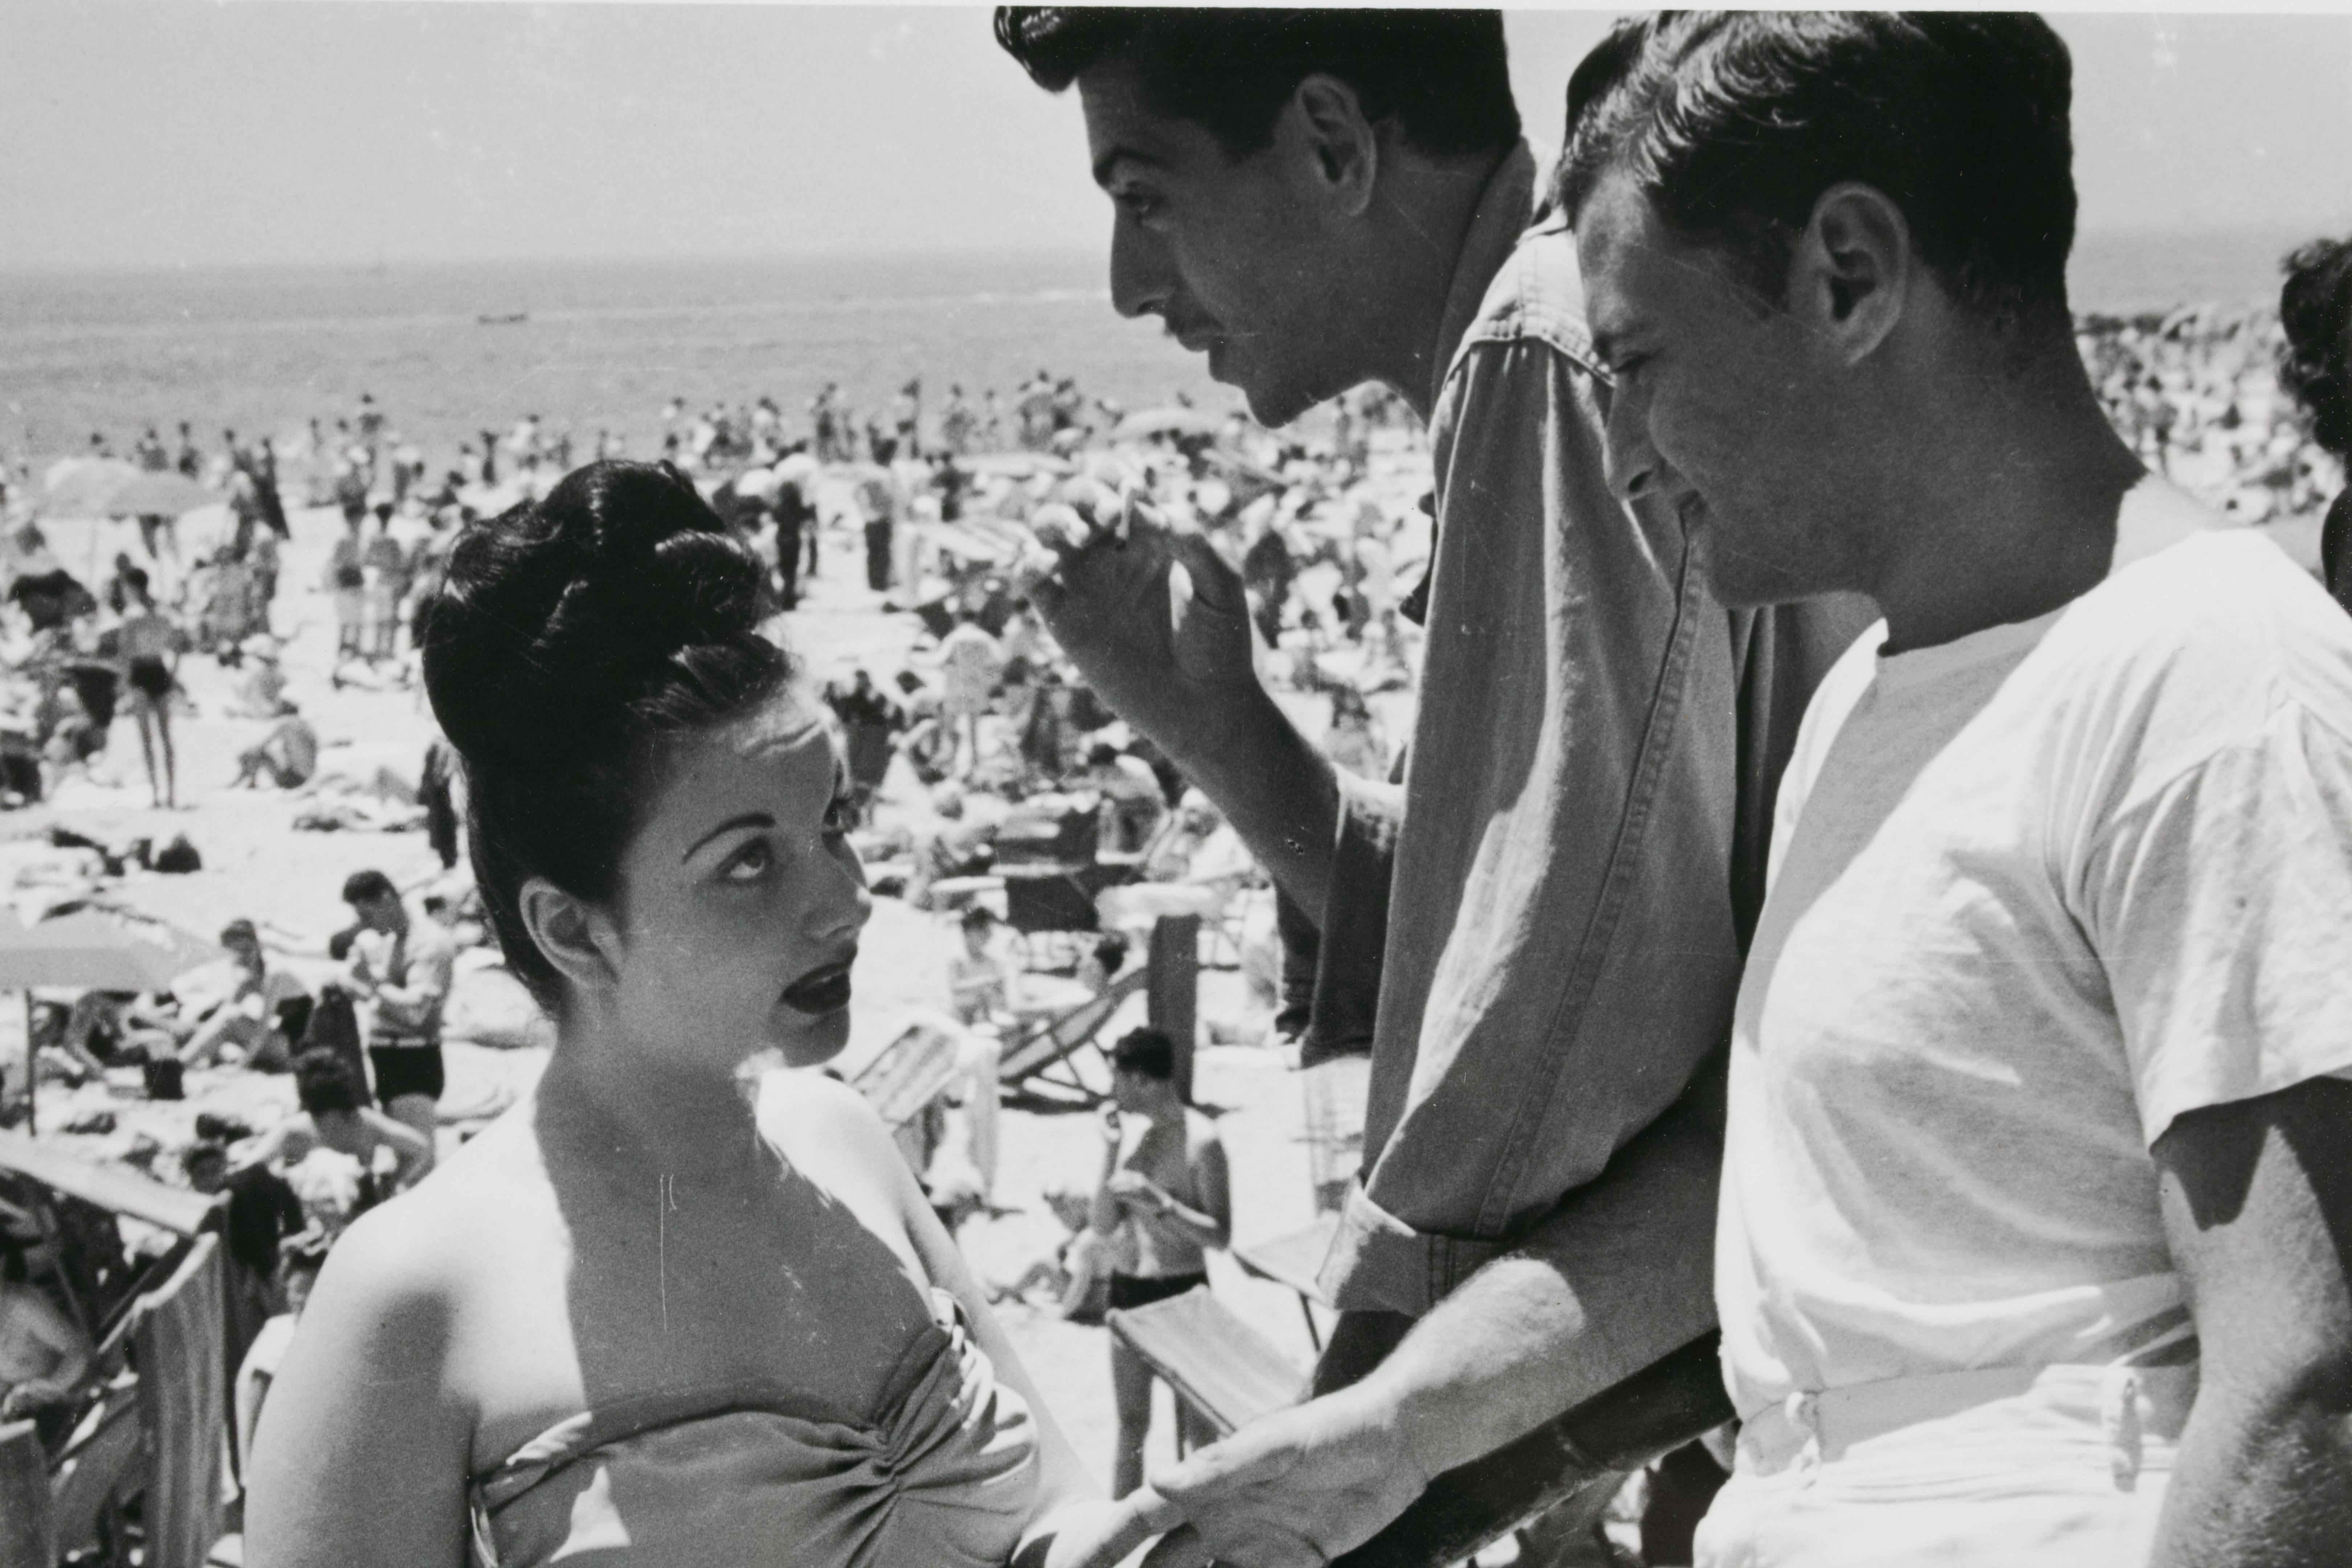 Coney Island Threesome, 1947 - Gray Black and White Photograph by Art Shay